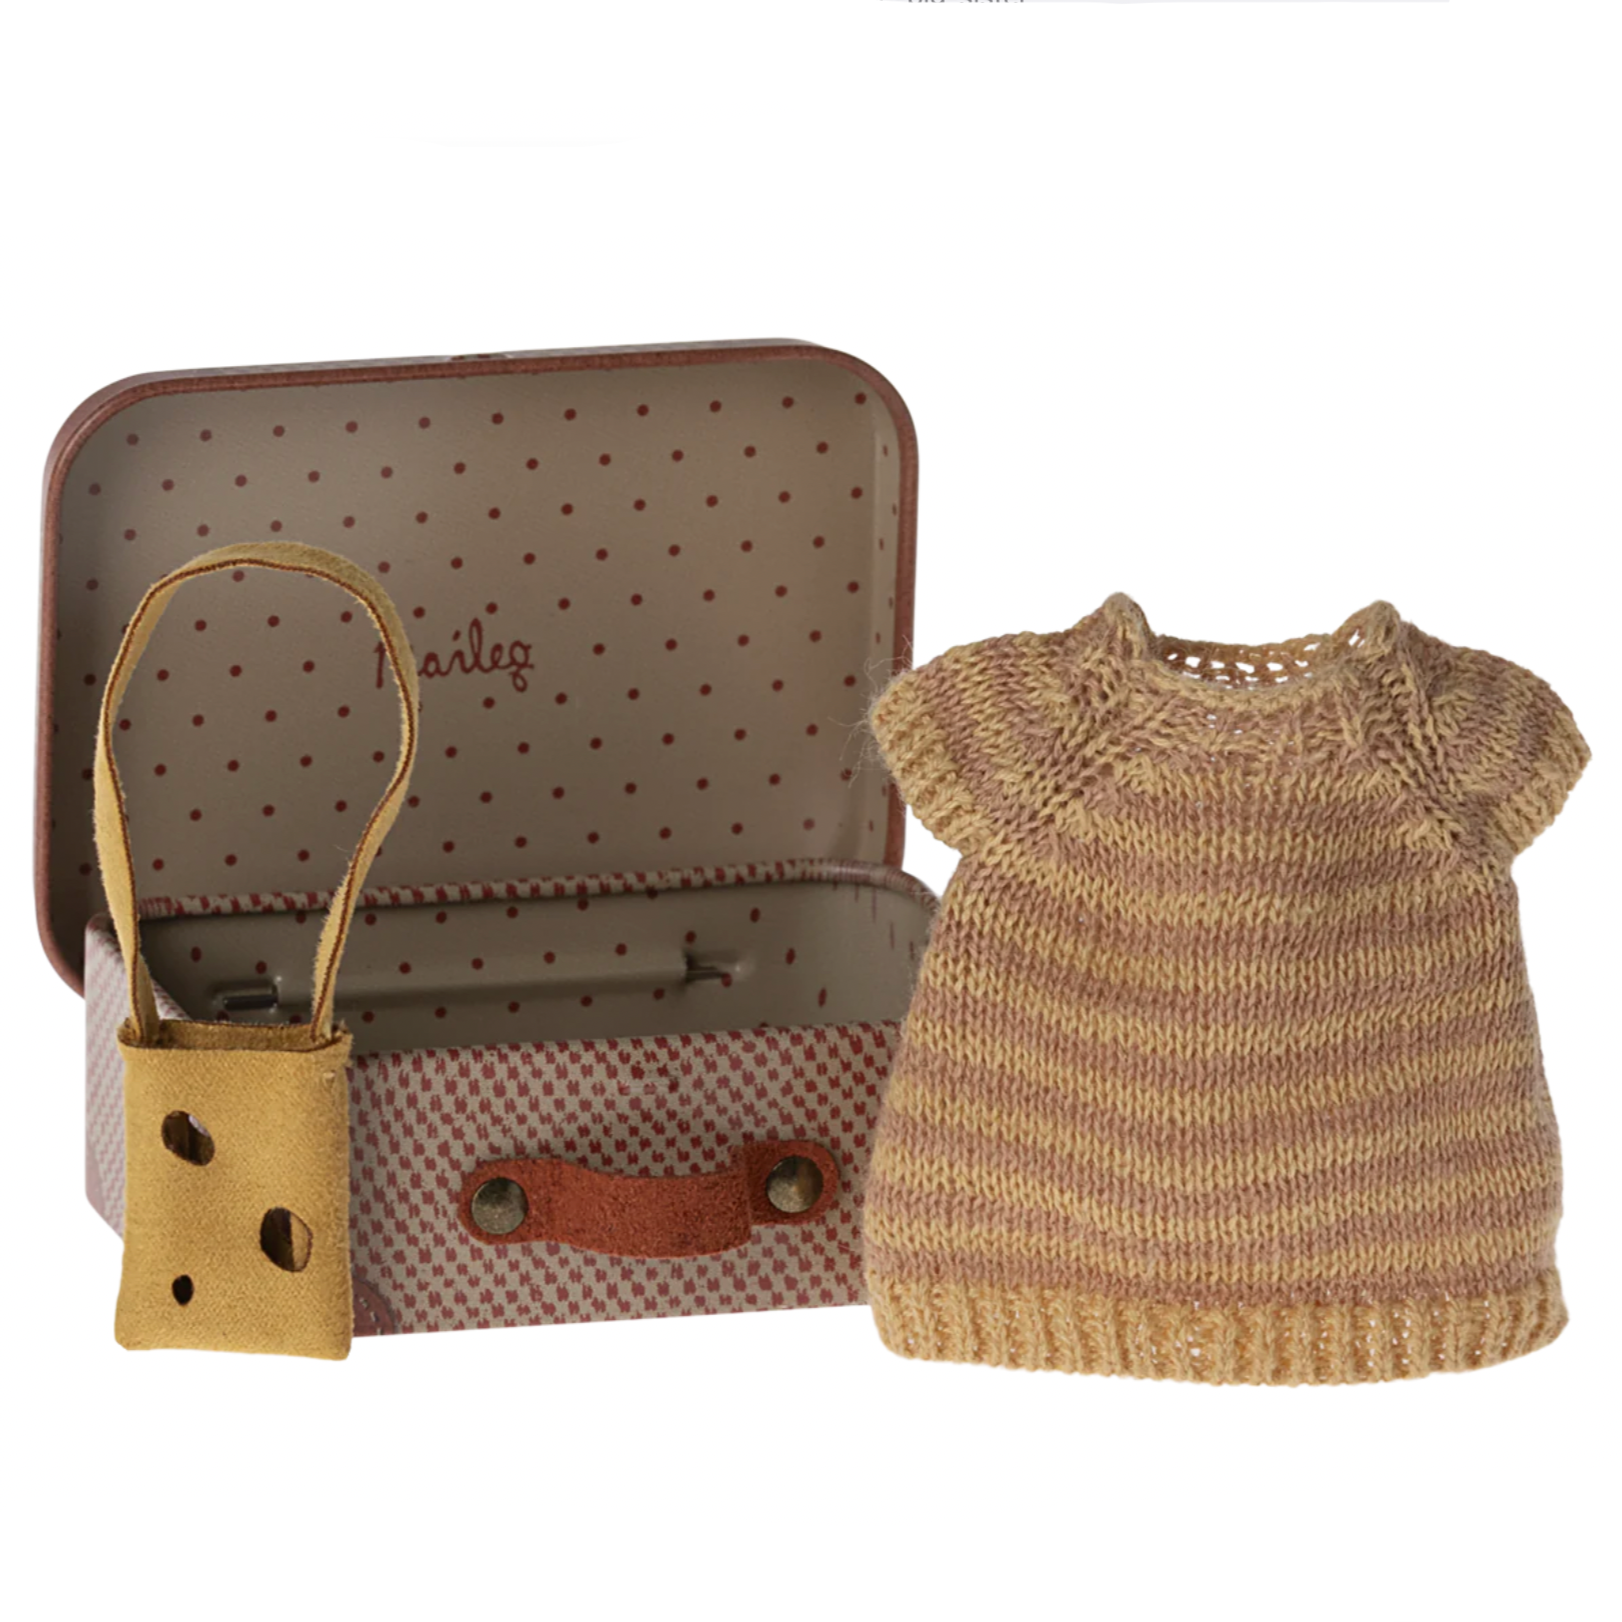 Knitted Dress & Bag in Suitcase for Mouse - big sister